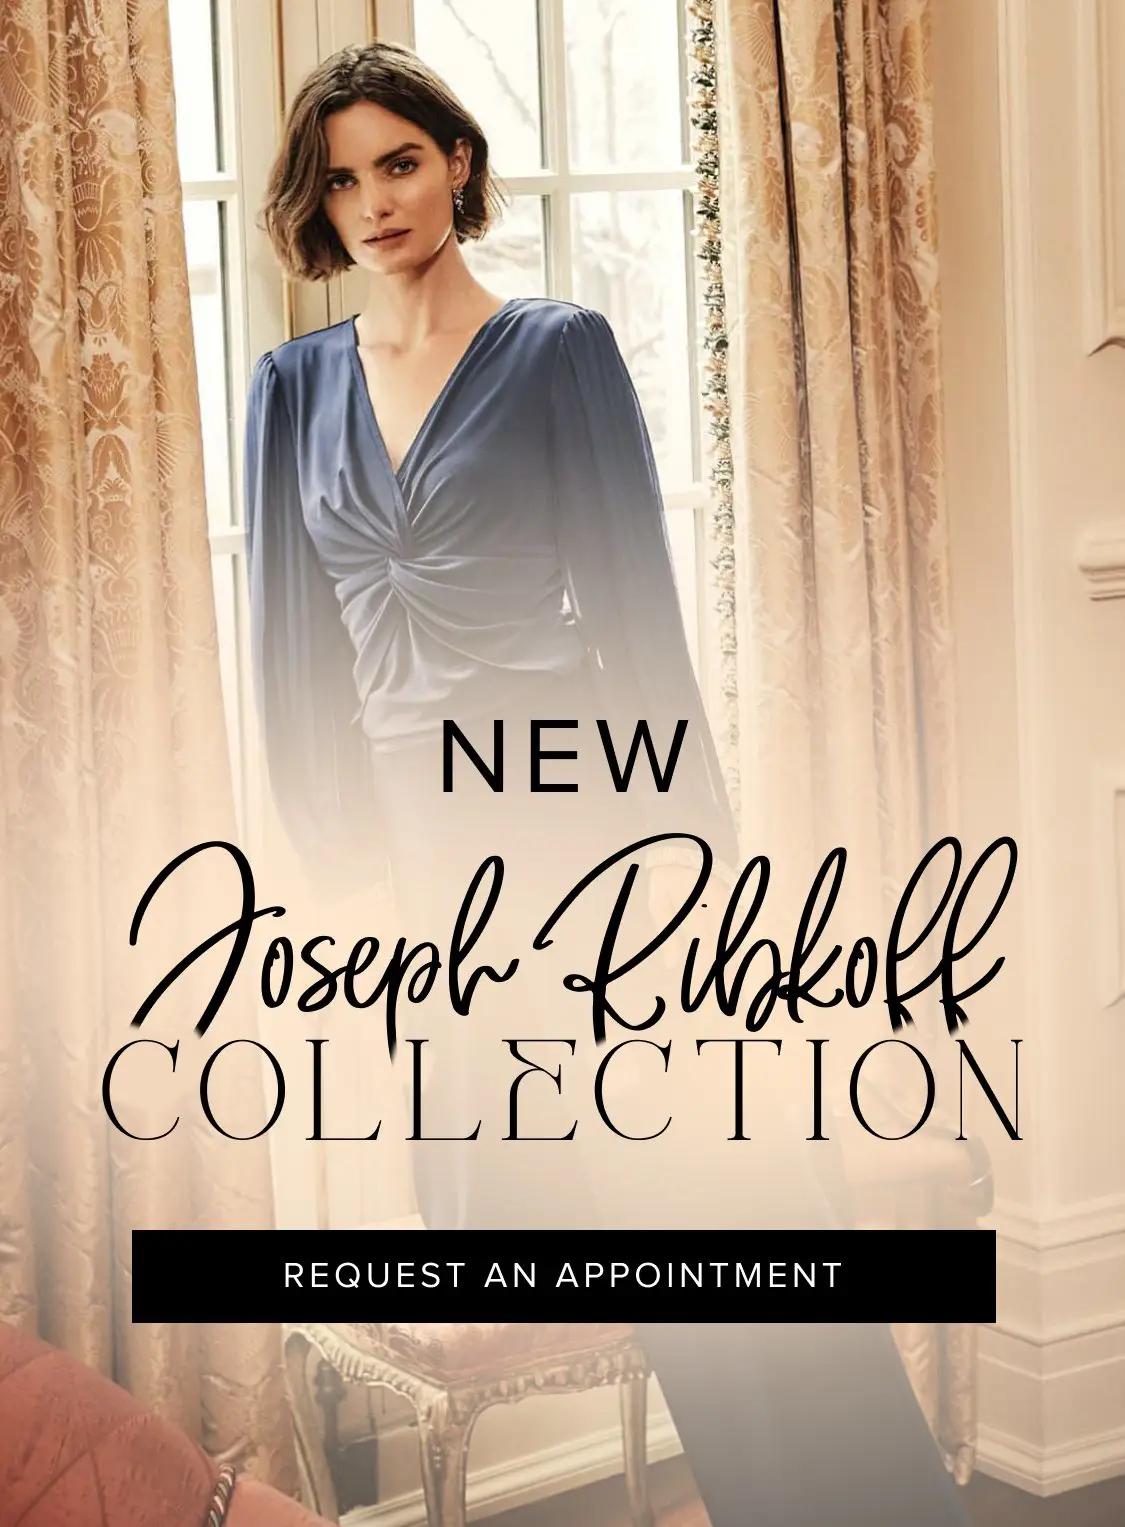 New Joseph Ribkoff Collection Banner for Mobile